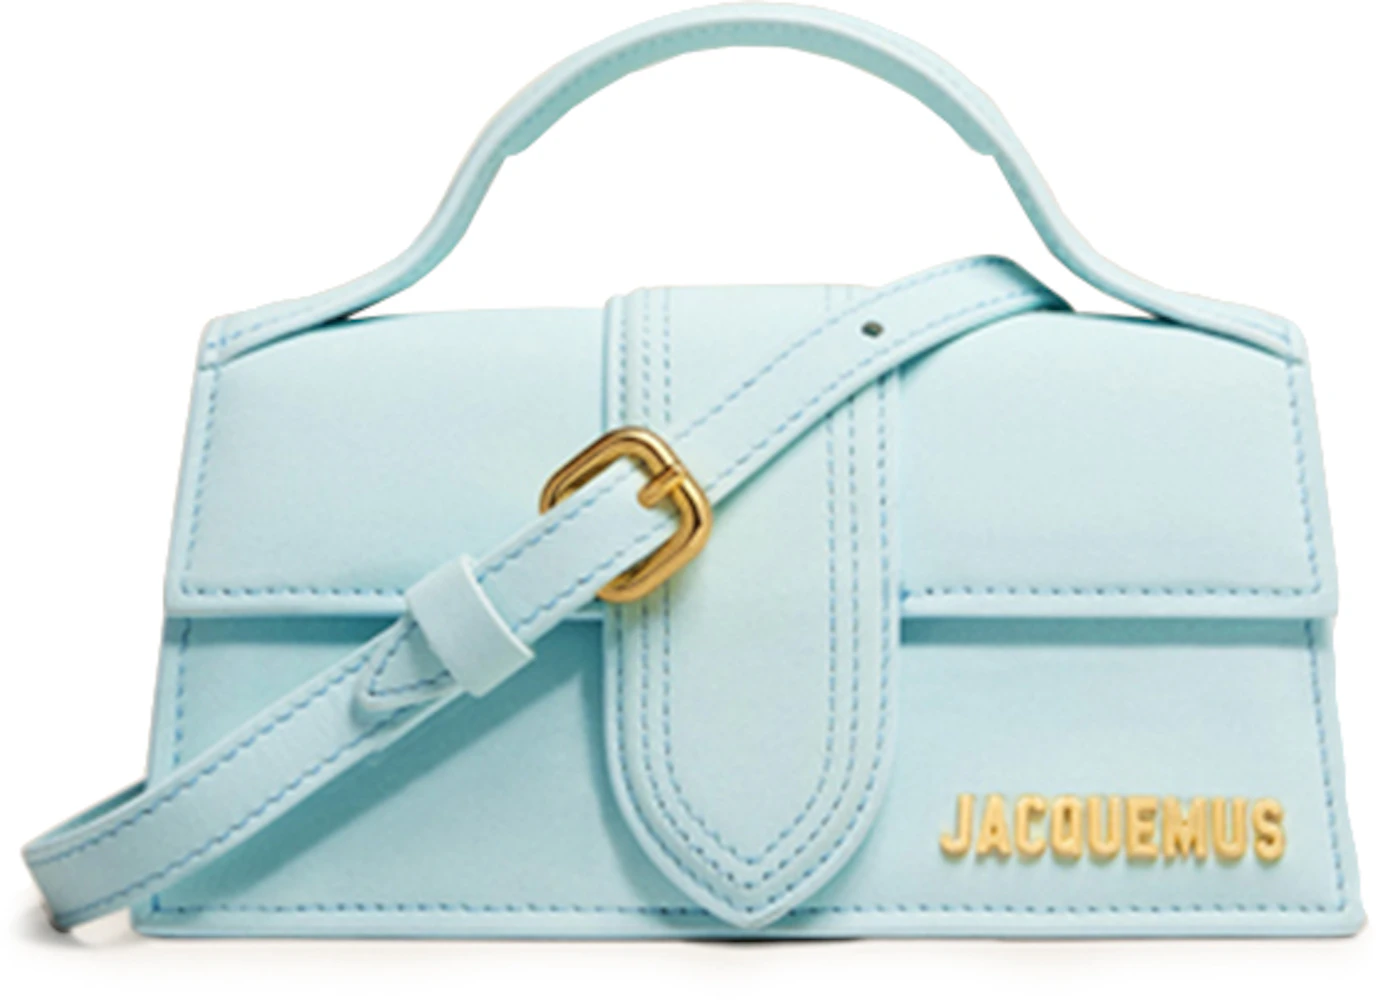 Le Bambino Leather Shoulder Bag in Blue - Jacquemus